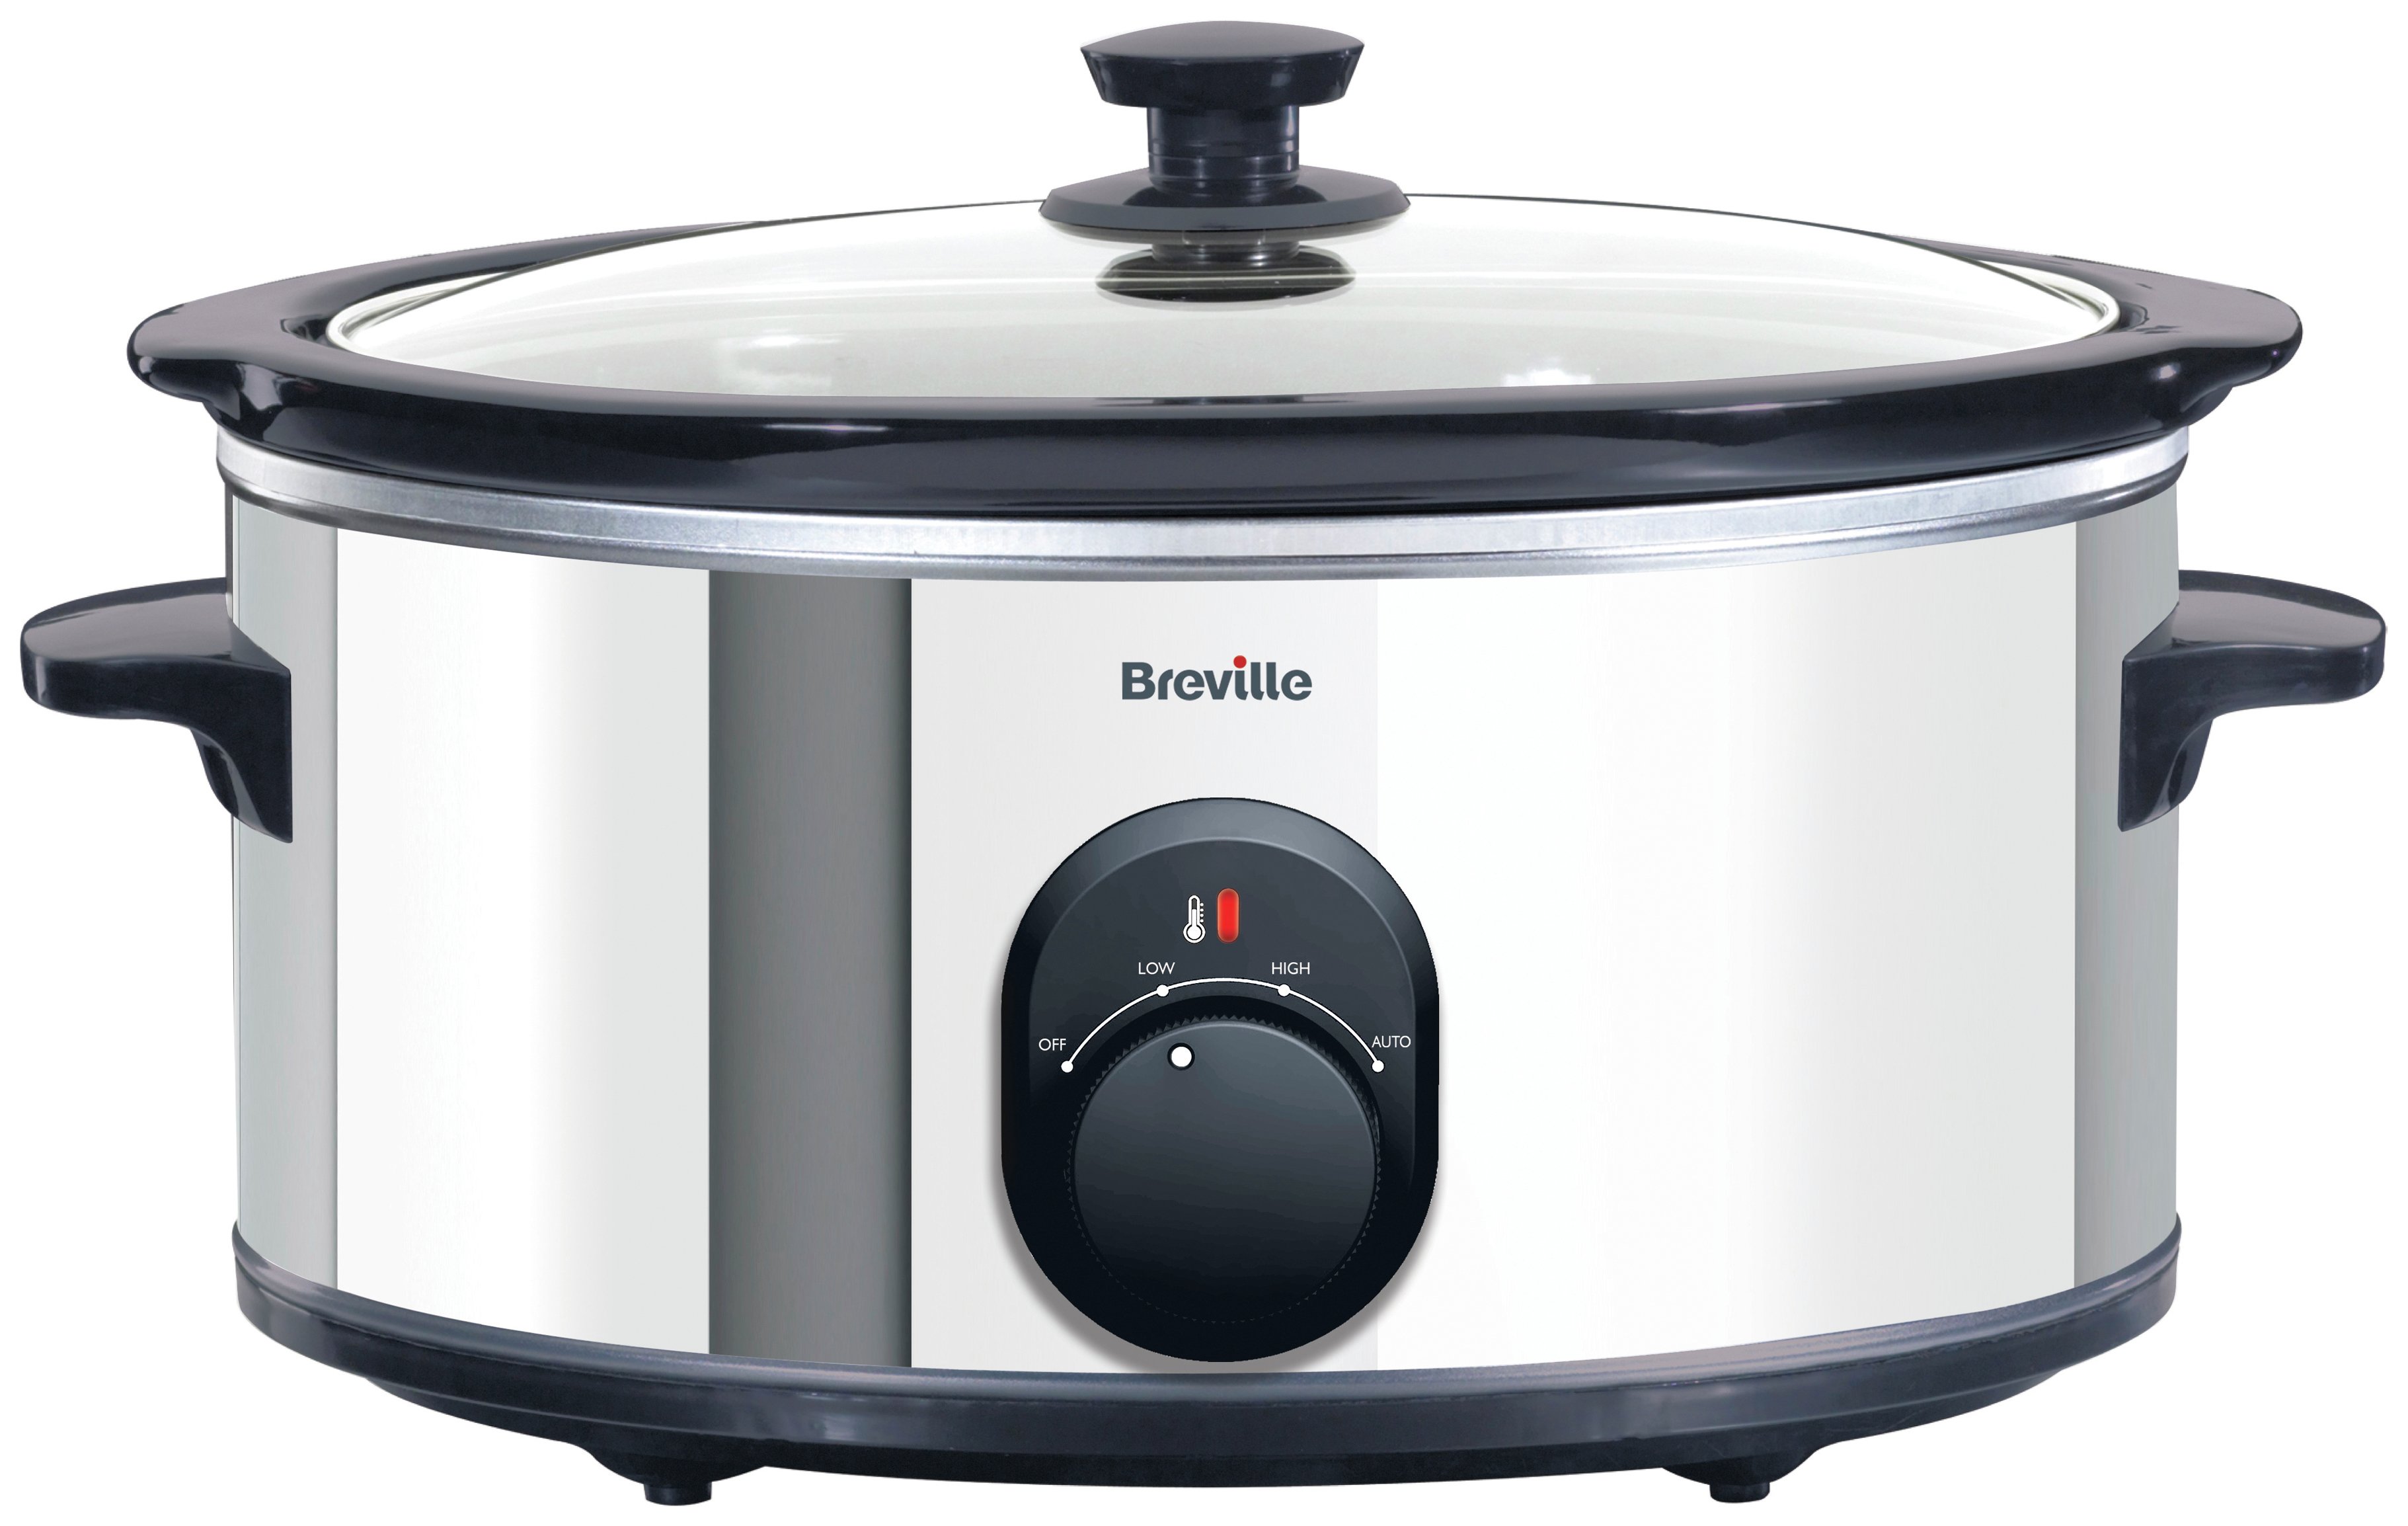 Breville 4.5L Slow Cooker - Stainless Steel